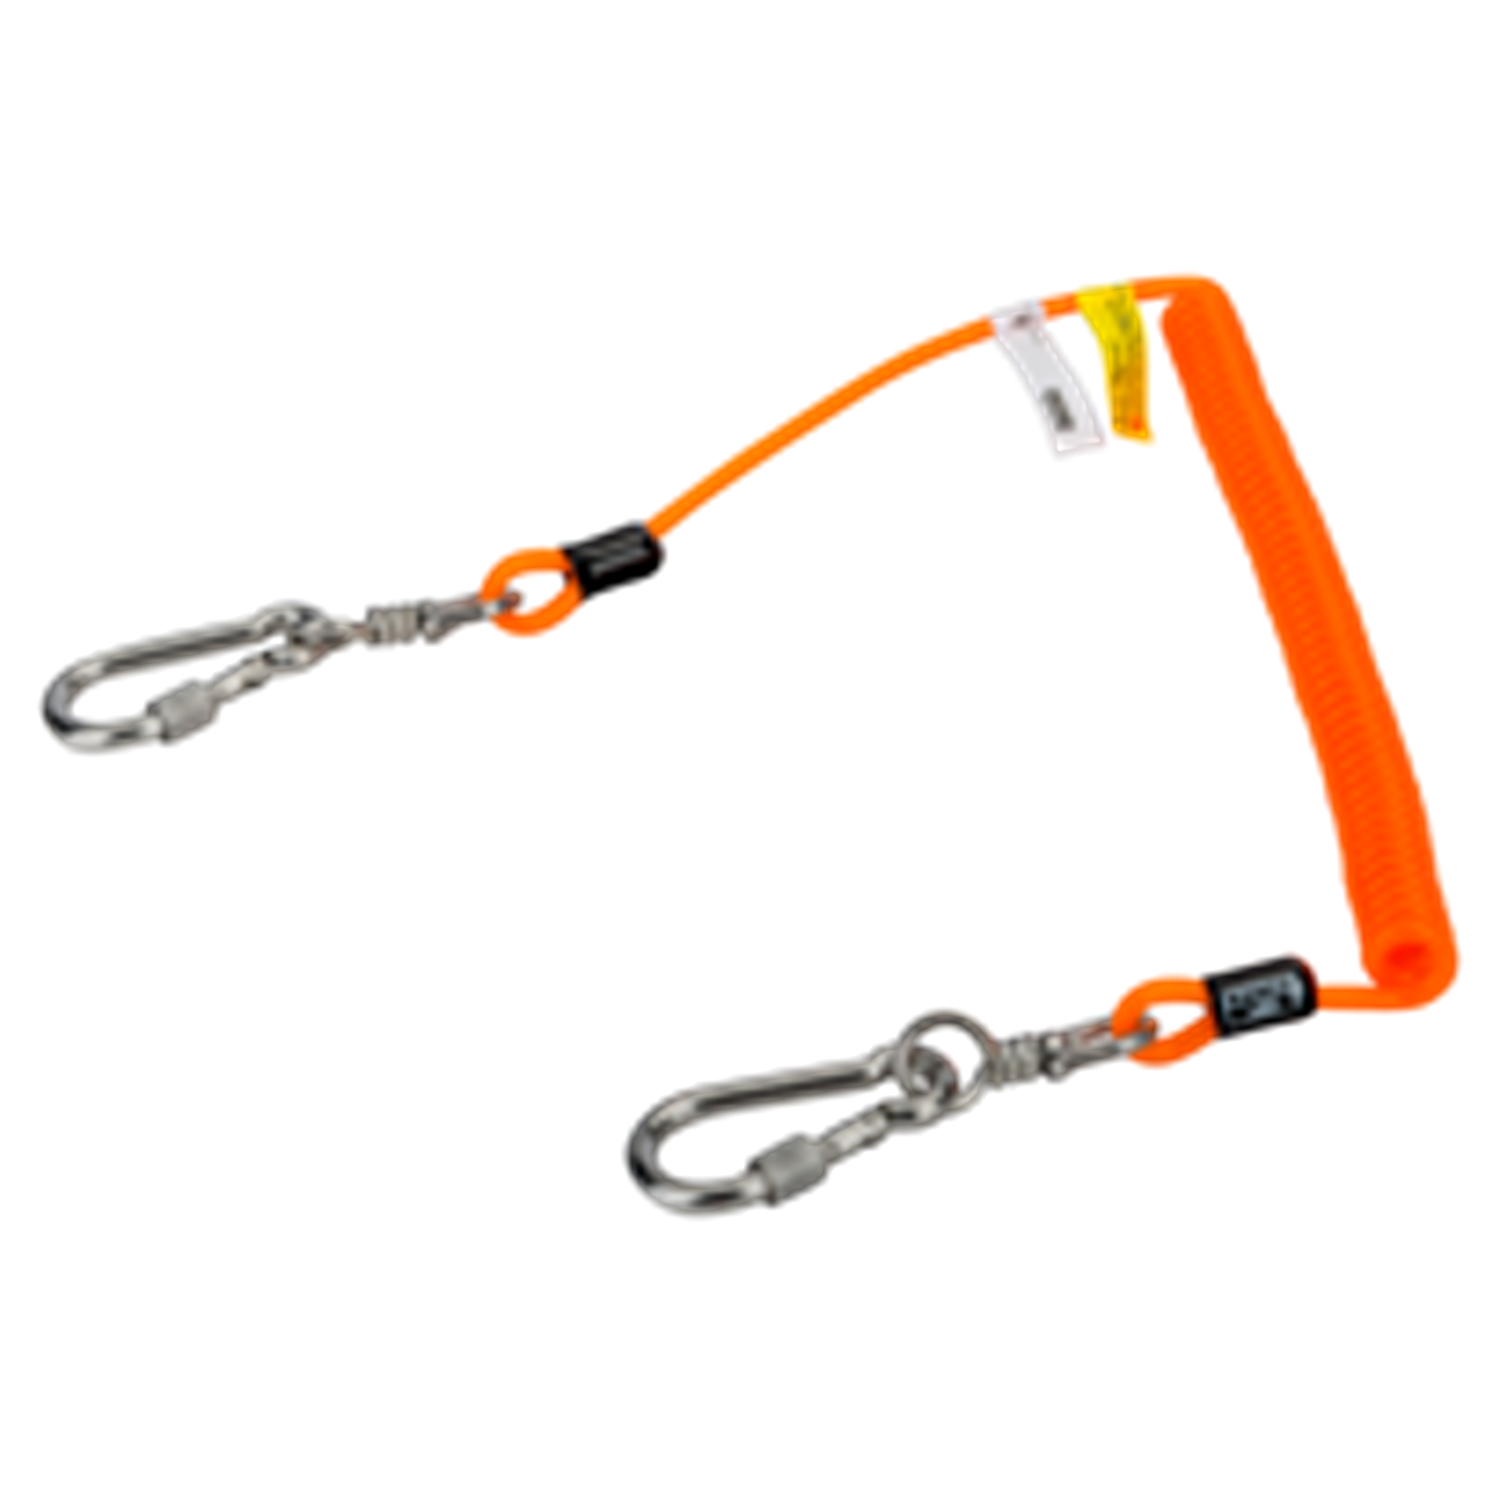 BAHCO 439000002 Coiled Lanyard with Swivel Carabiner 2 kg - Premium Coiled Lanyard from BAHCO - Shop now at Yew Aik.